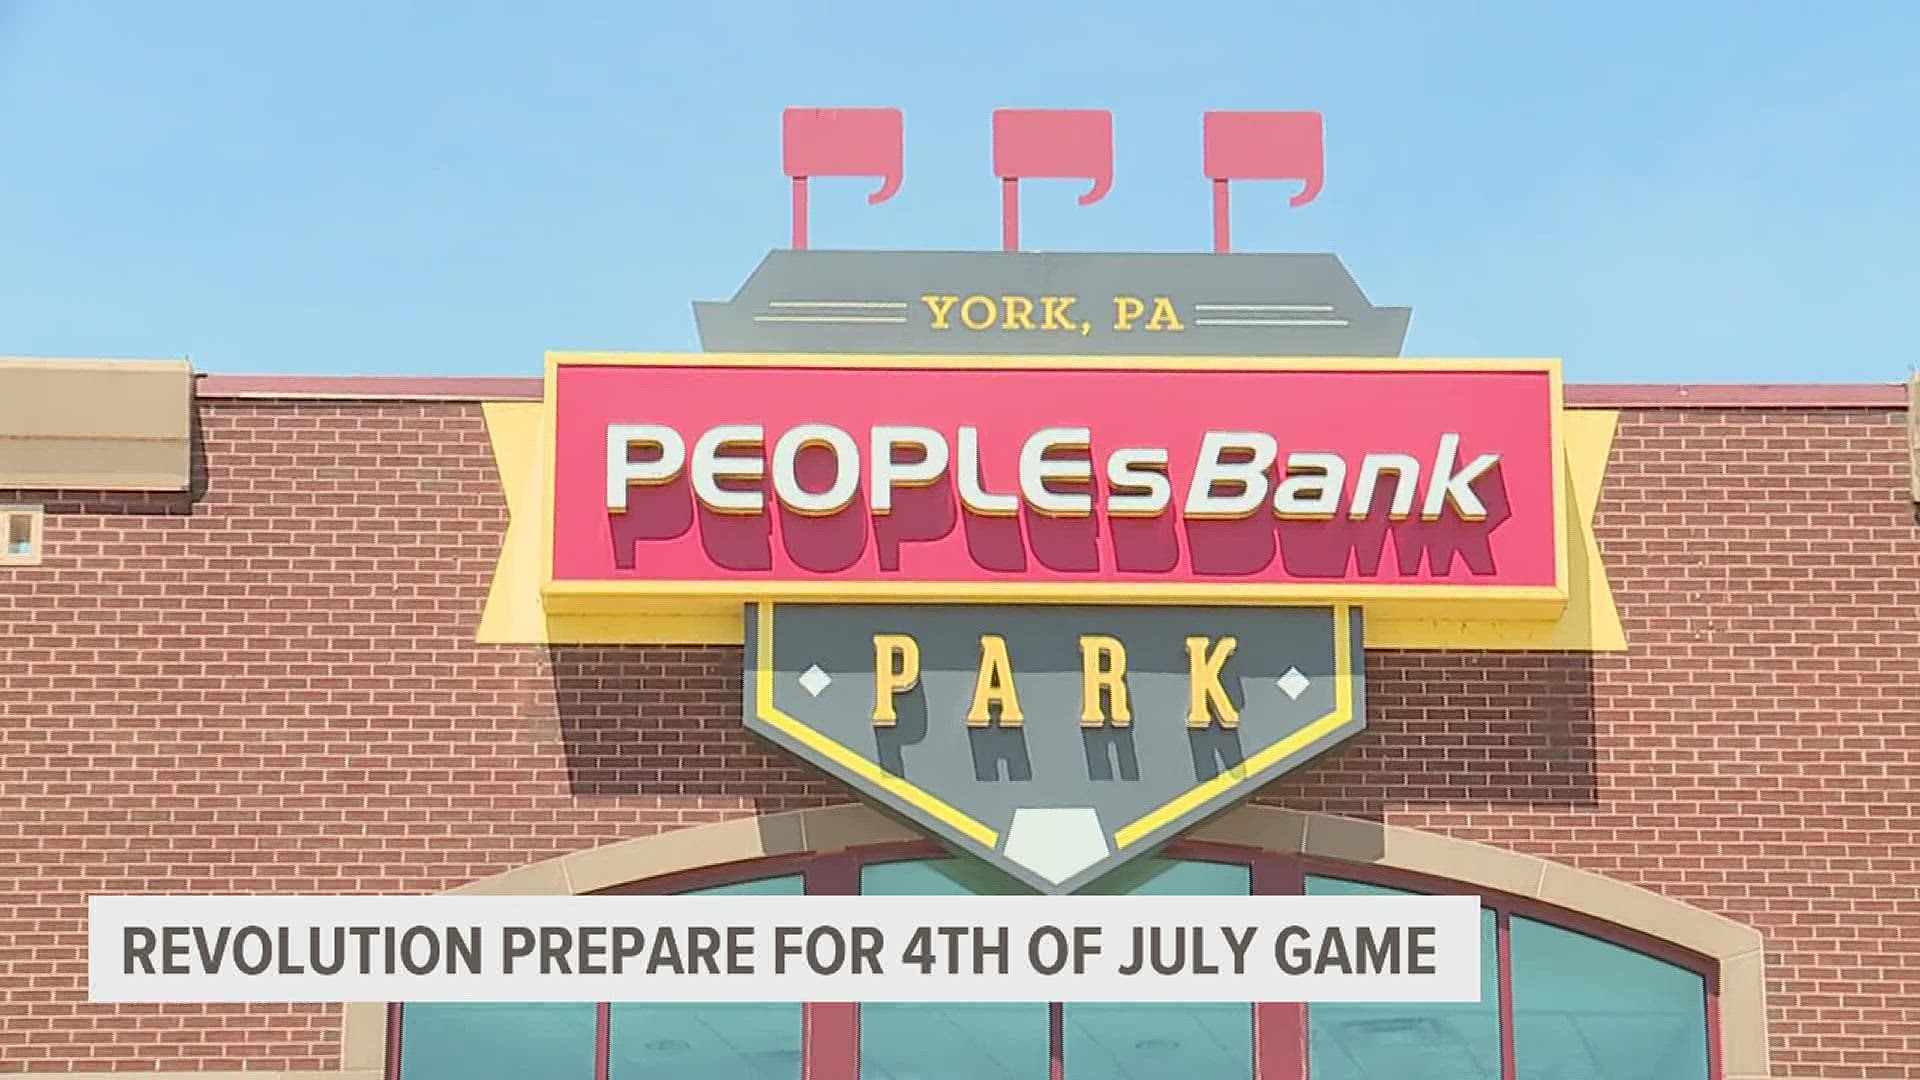 The Revs celebrate Fourth of July with themed gifts and prizes